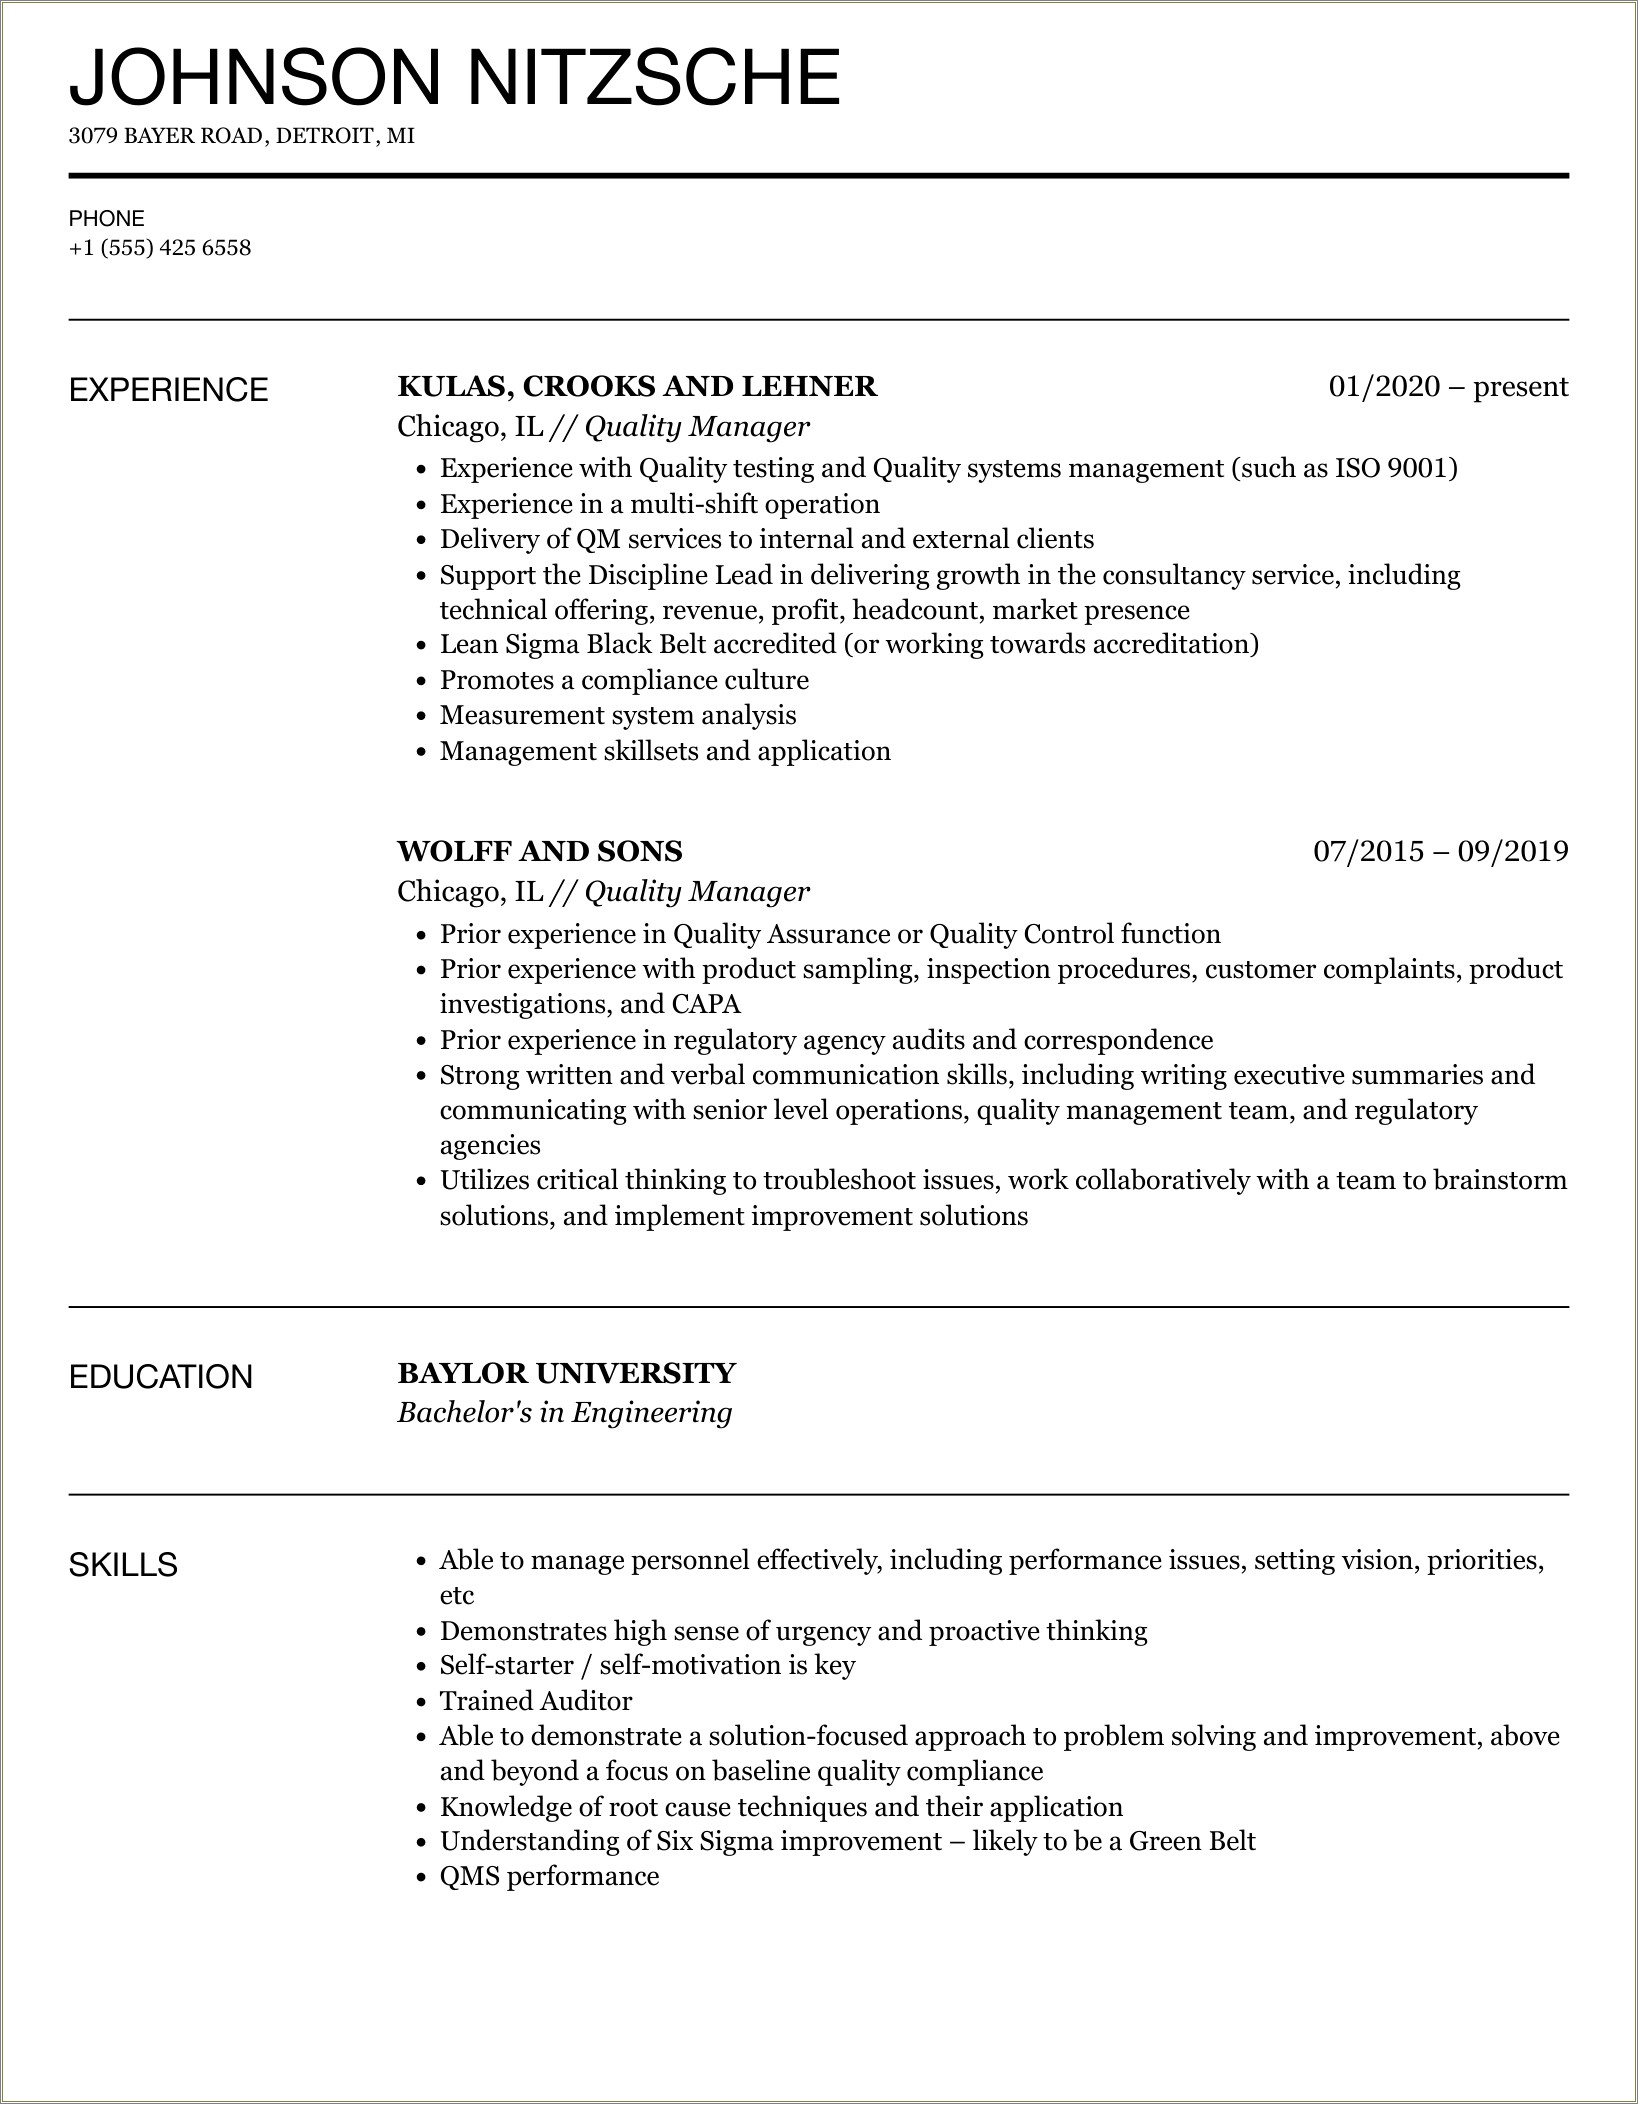 Faa Repair Station Quality Manager Resume